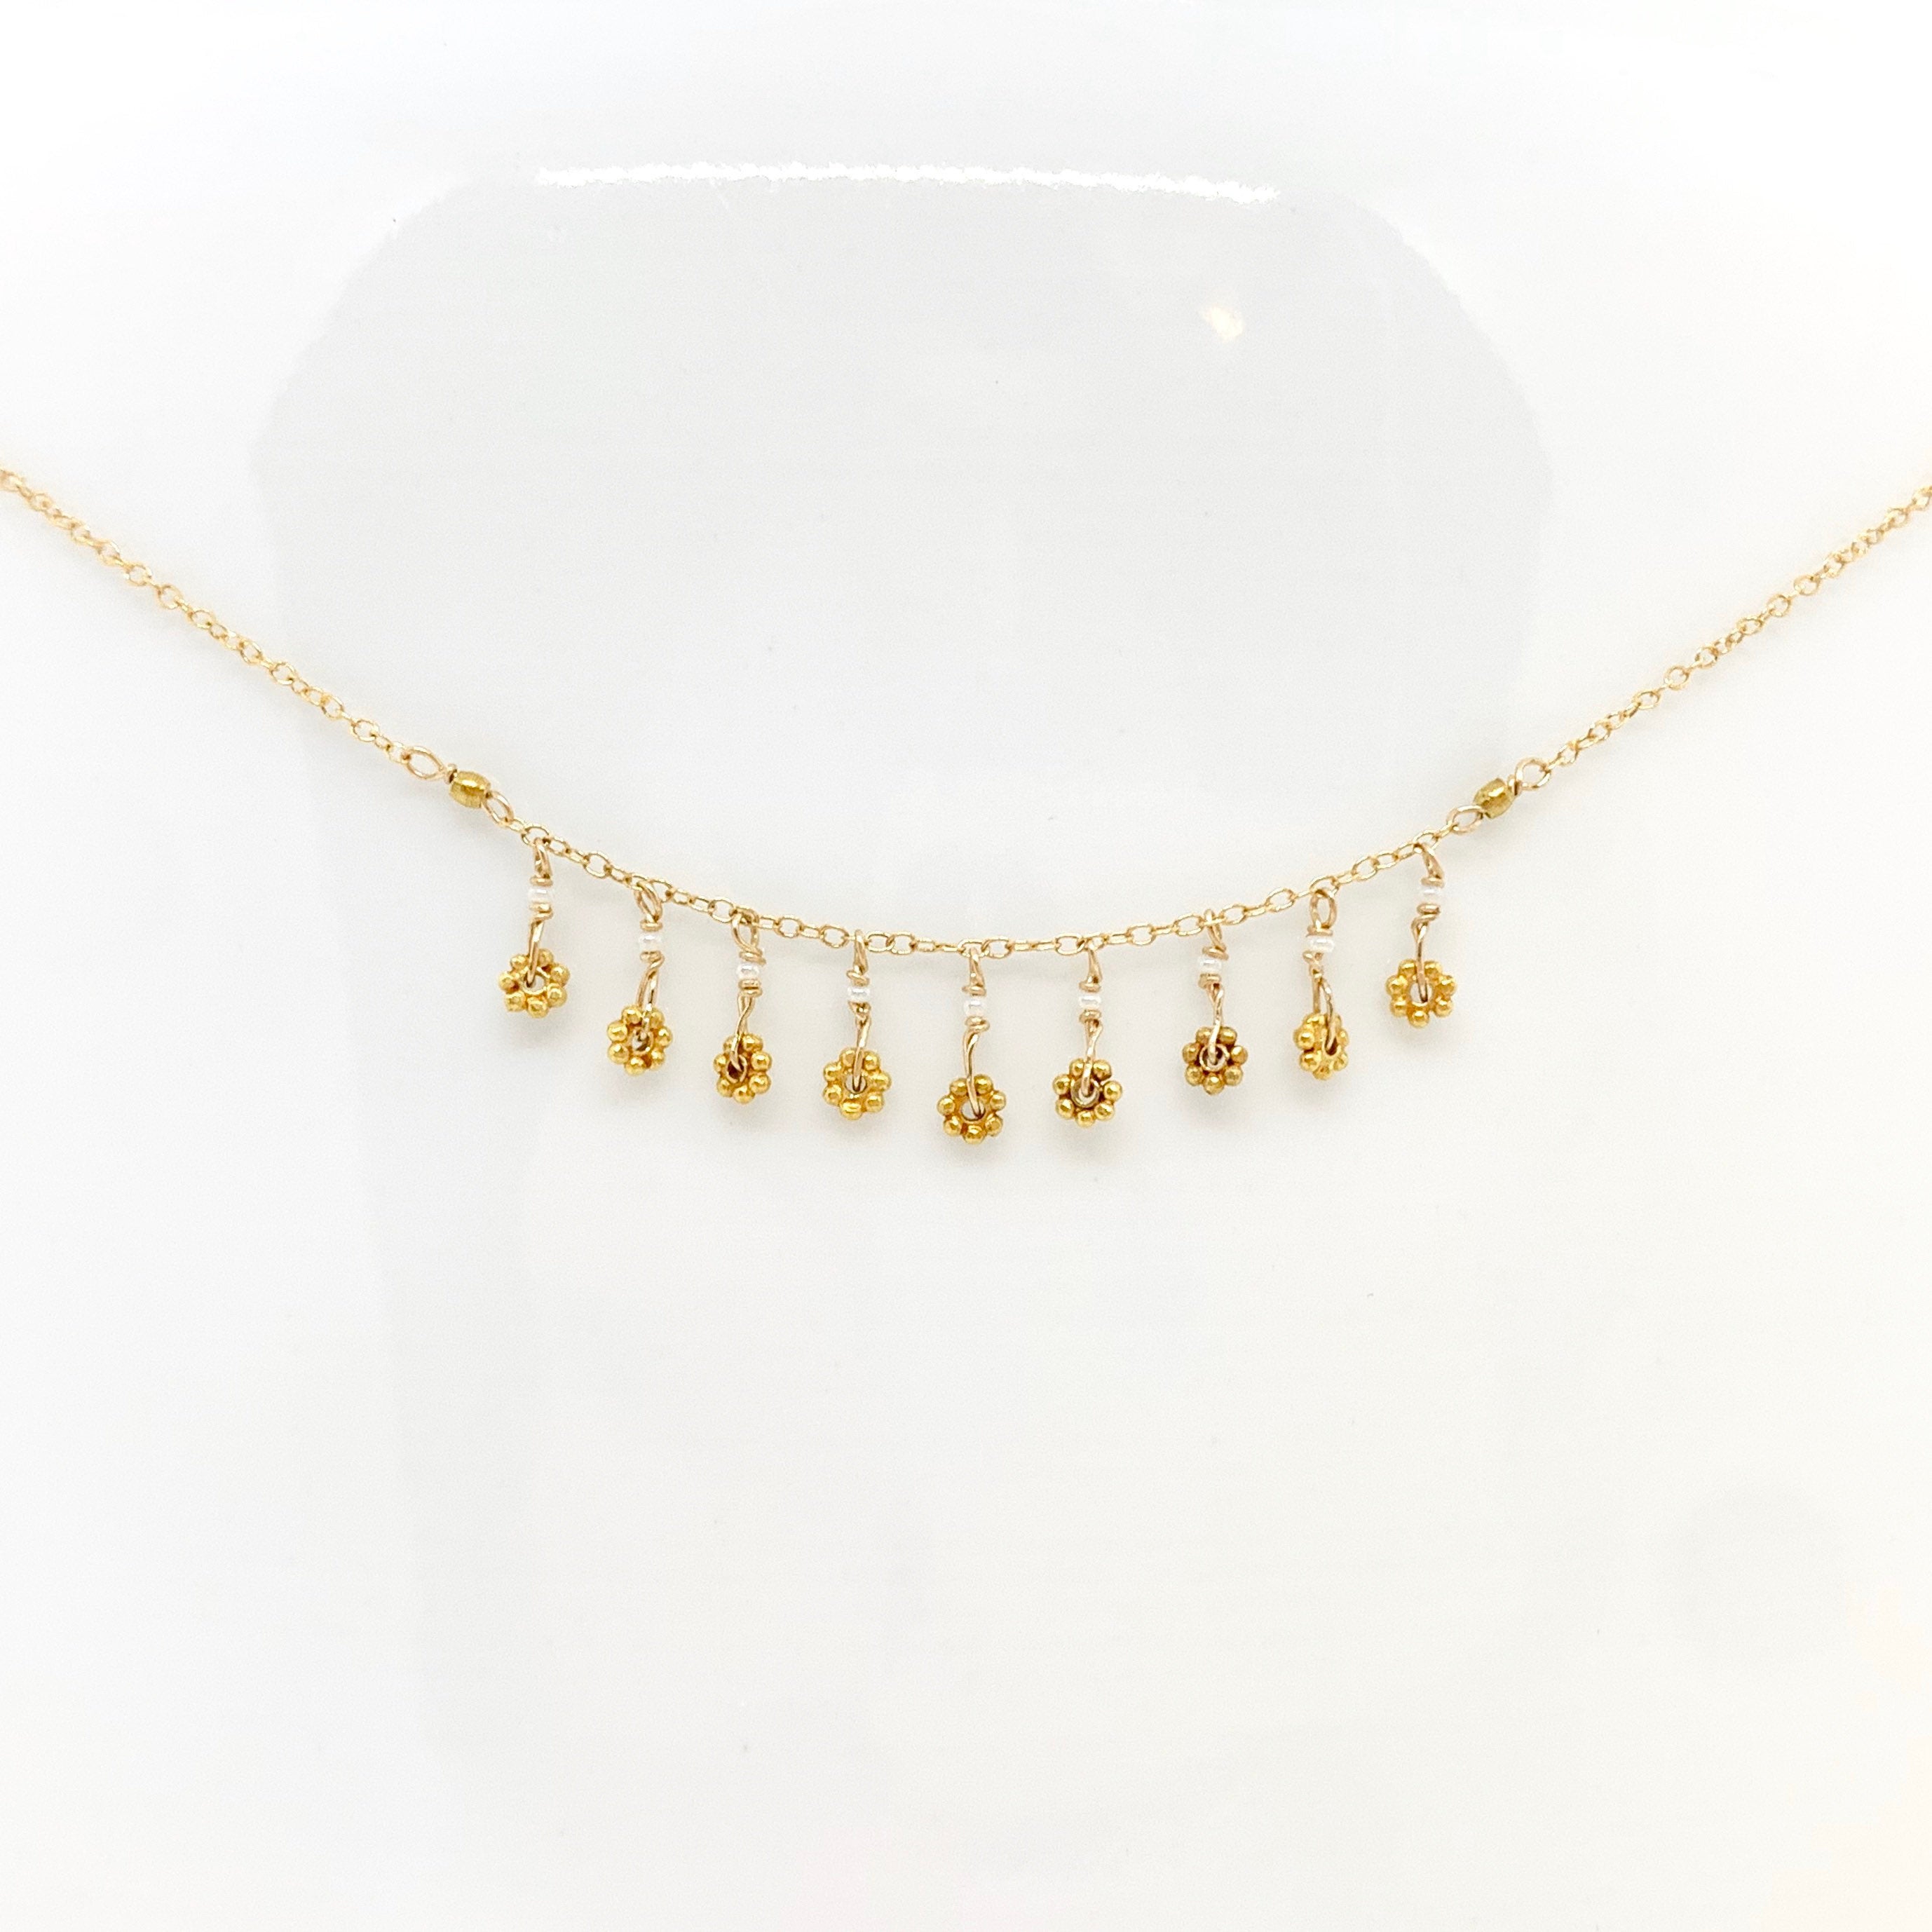 14k Gold Chain Necklace w/ 18k Gold Daisies, 18k Gold Nuggets & Antique Italian Beads